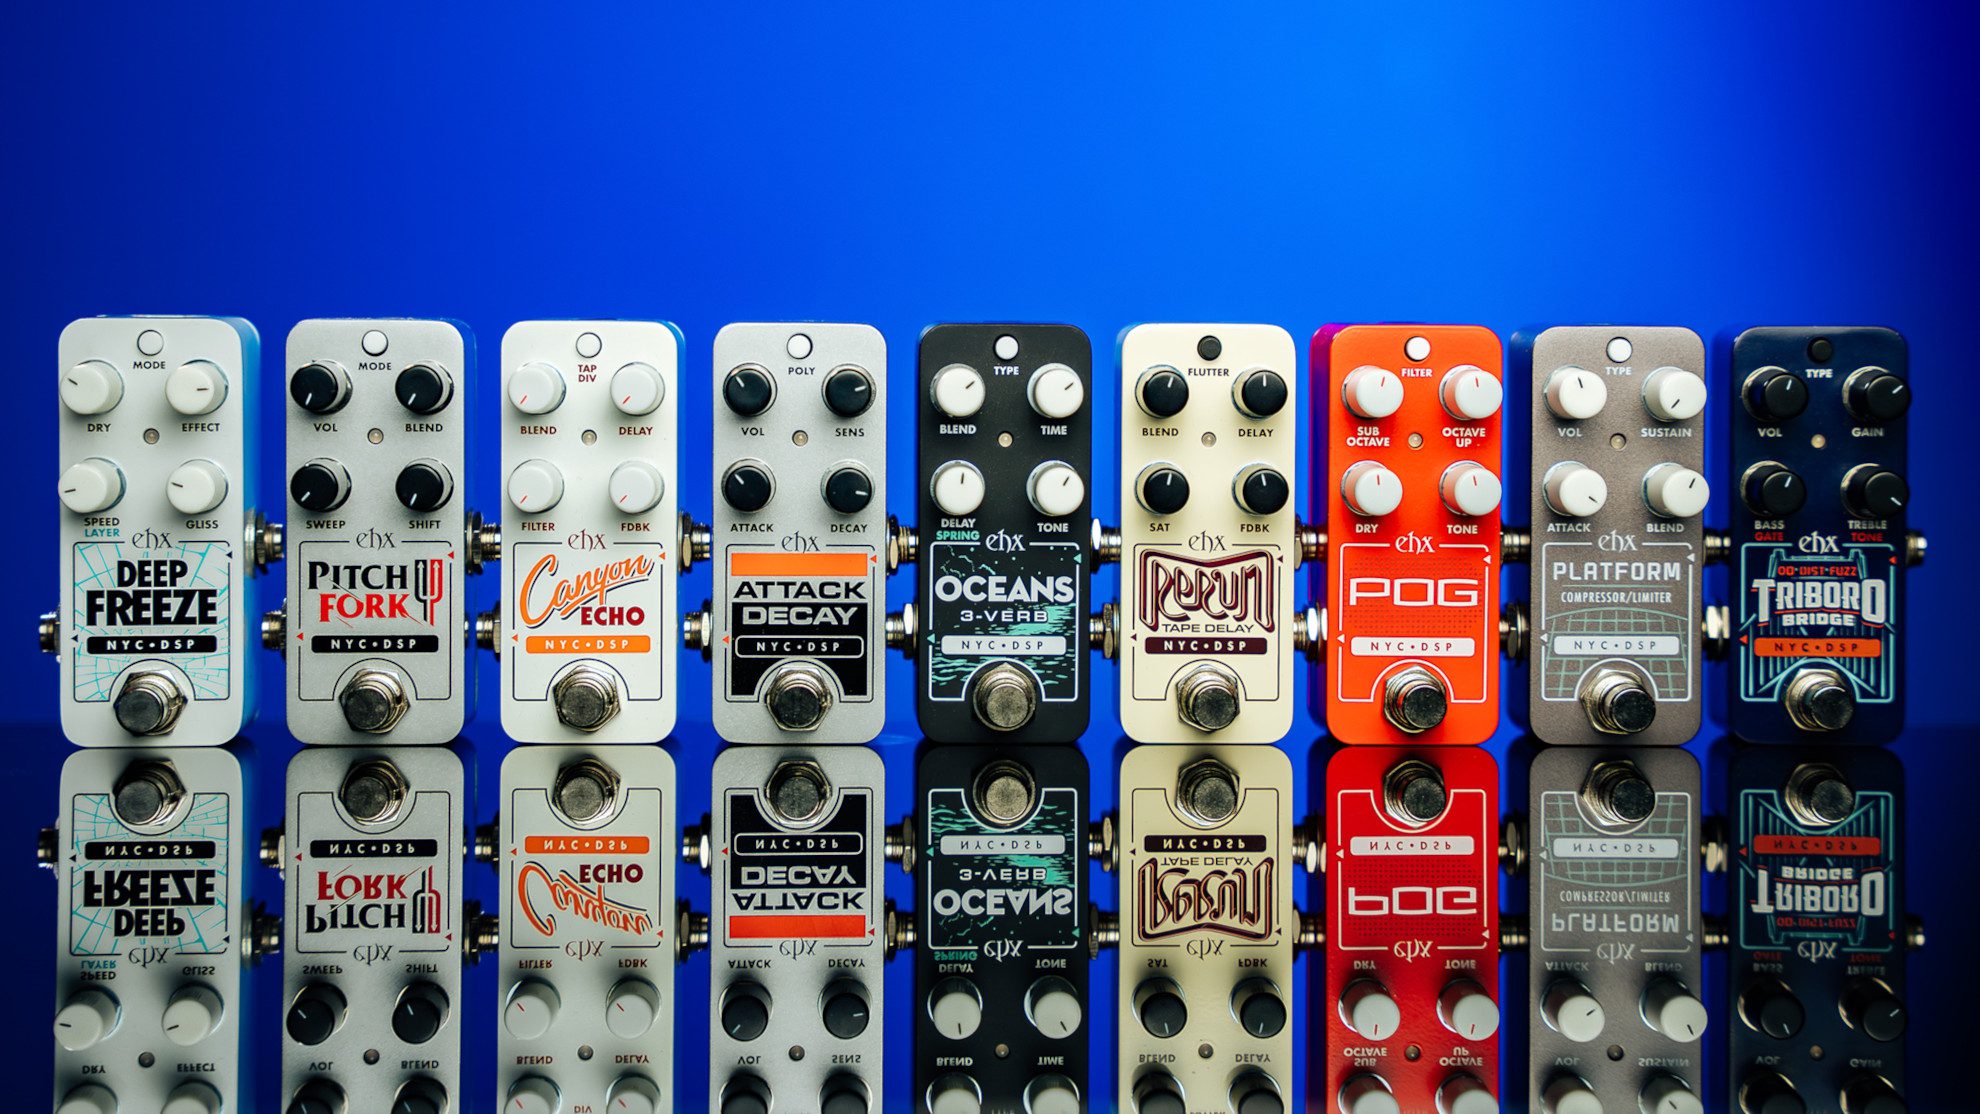 EHX’s Biggest Pedal Release Ever! Meet the Pico-sized NYC DSP Series